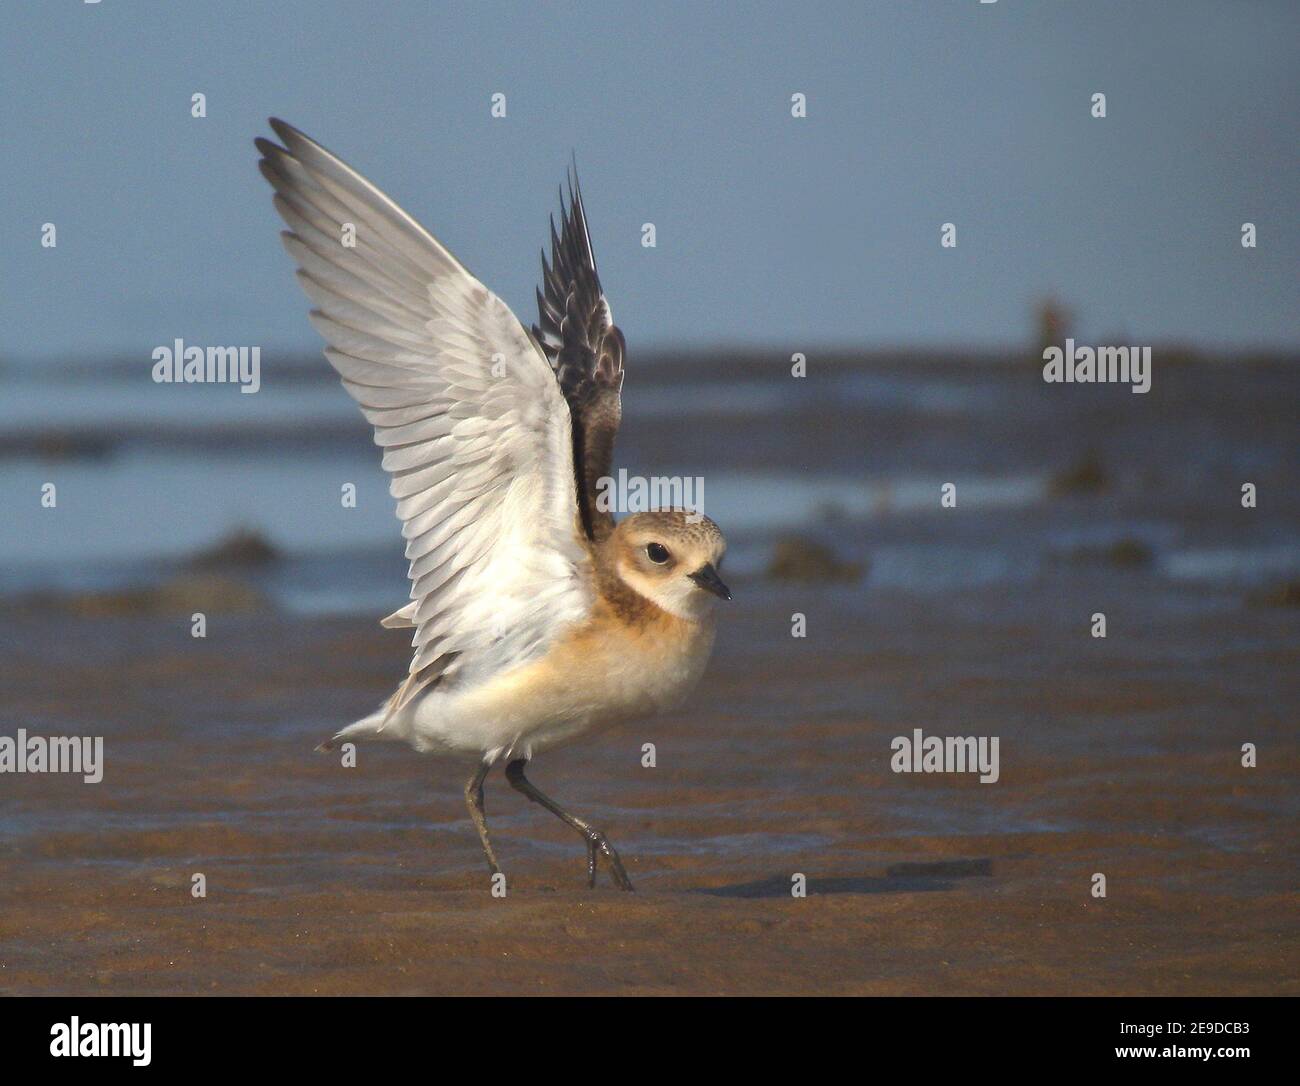 Lesser sand plover (Charadrius atrifrons schaeferi, Charadrius schaeferi), young bird walking with outstretched wings on the beach, side view, China, Stock Photo